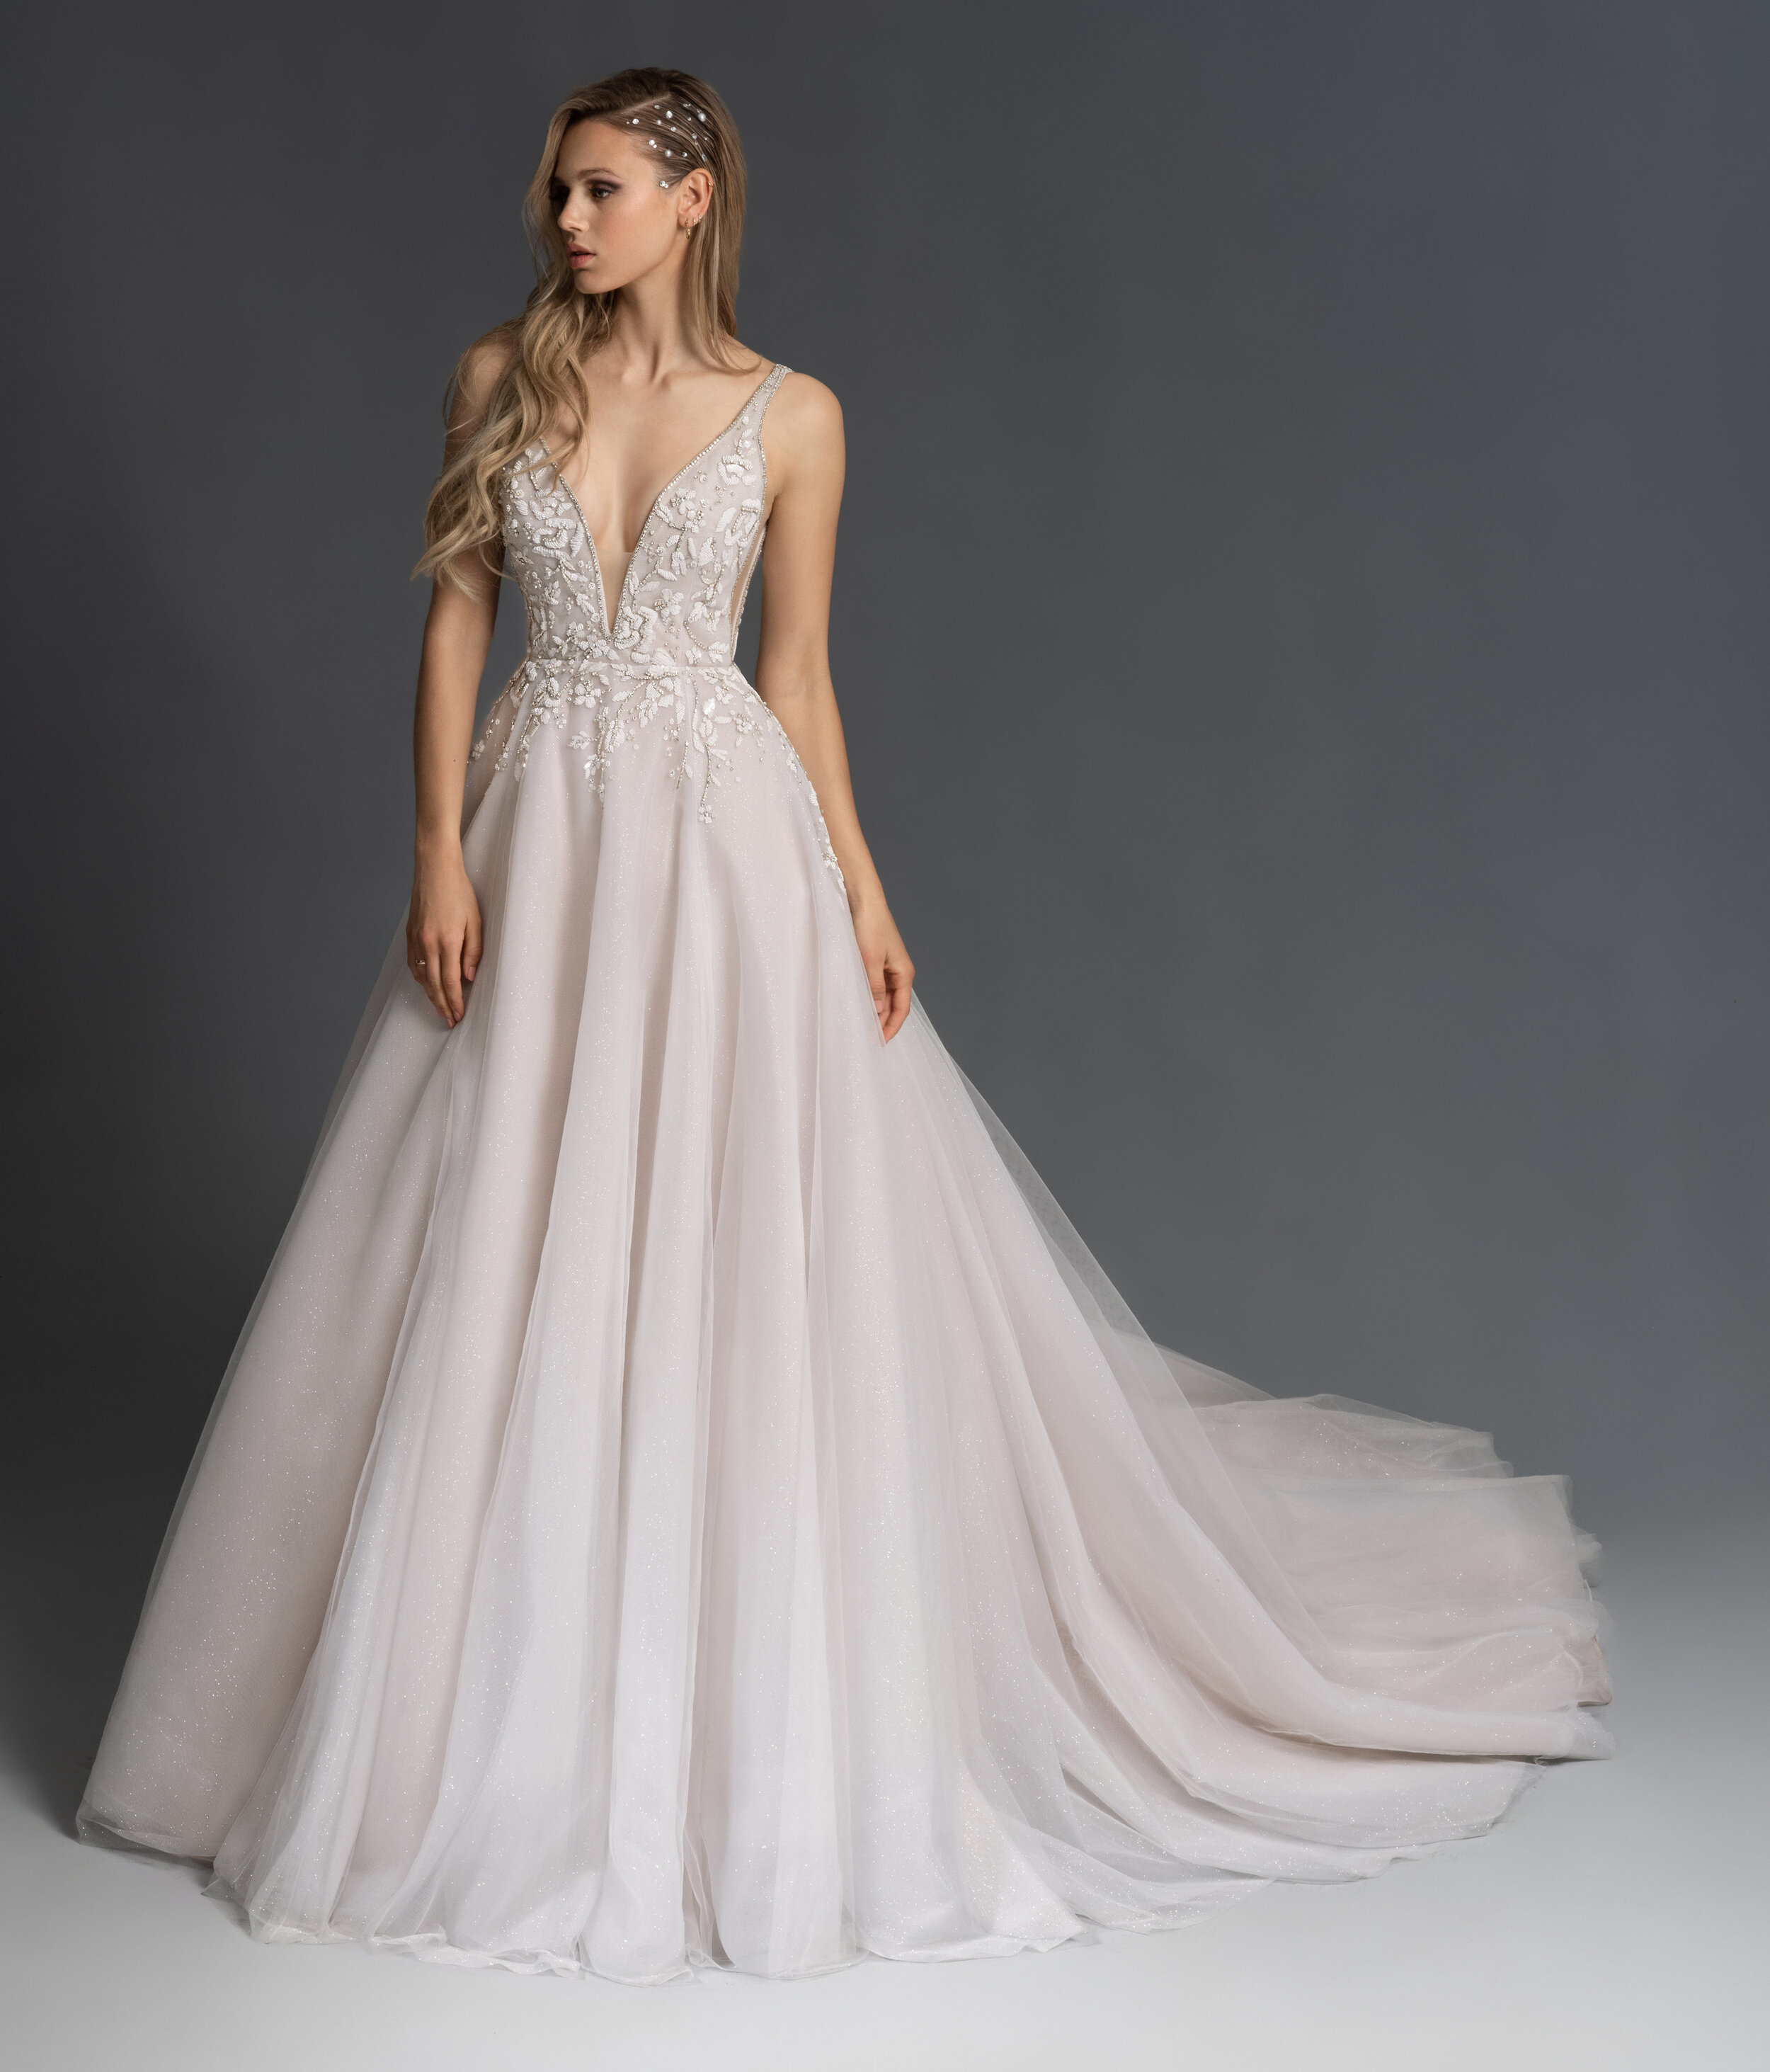 leah gown hayley paige price